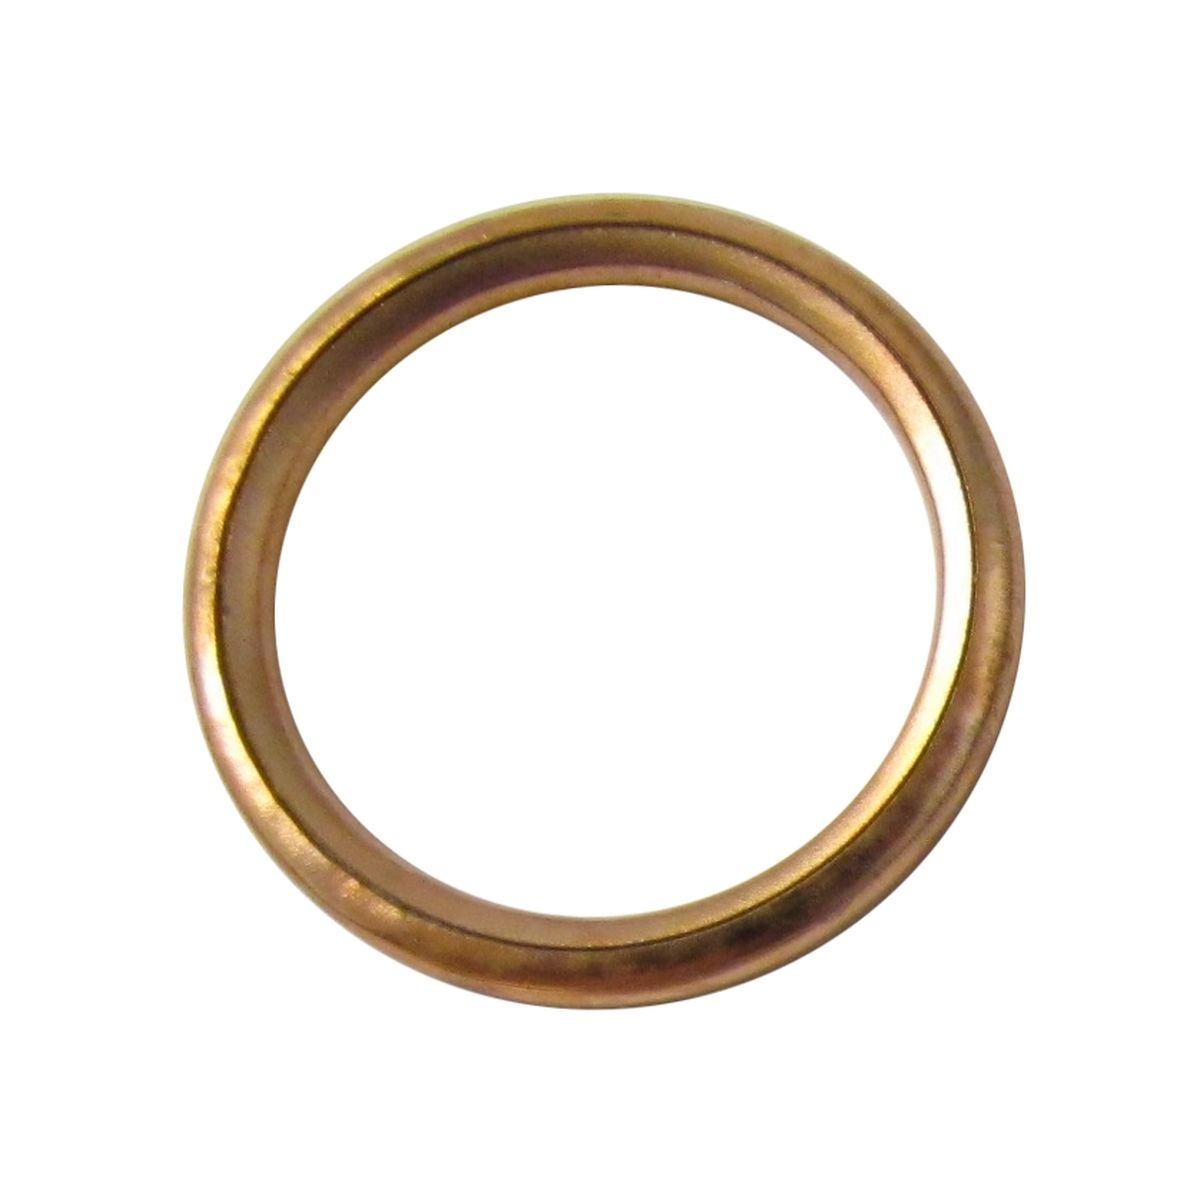 Exhaust New Free Shipping Gasket Copper 1 for 1993 Peugeot SV Regular discount Drum Front Mod J 50